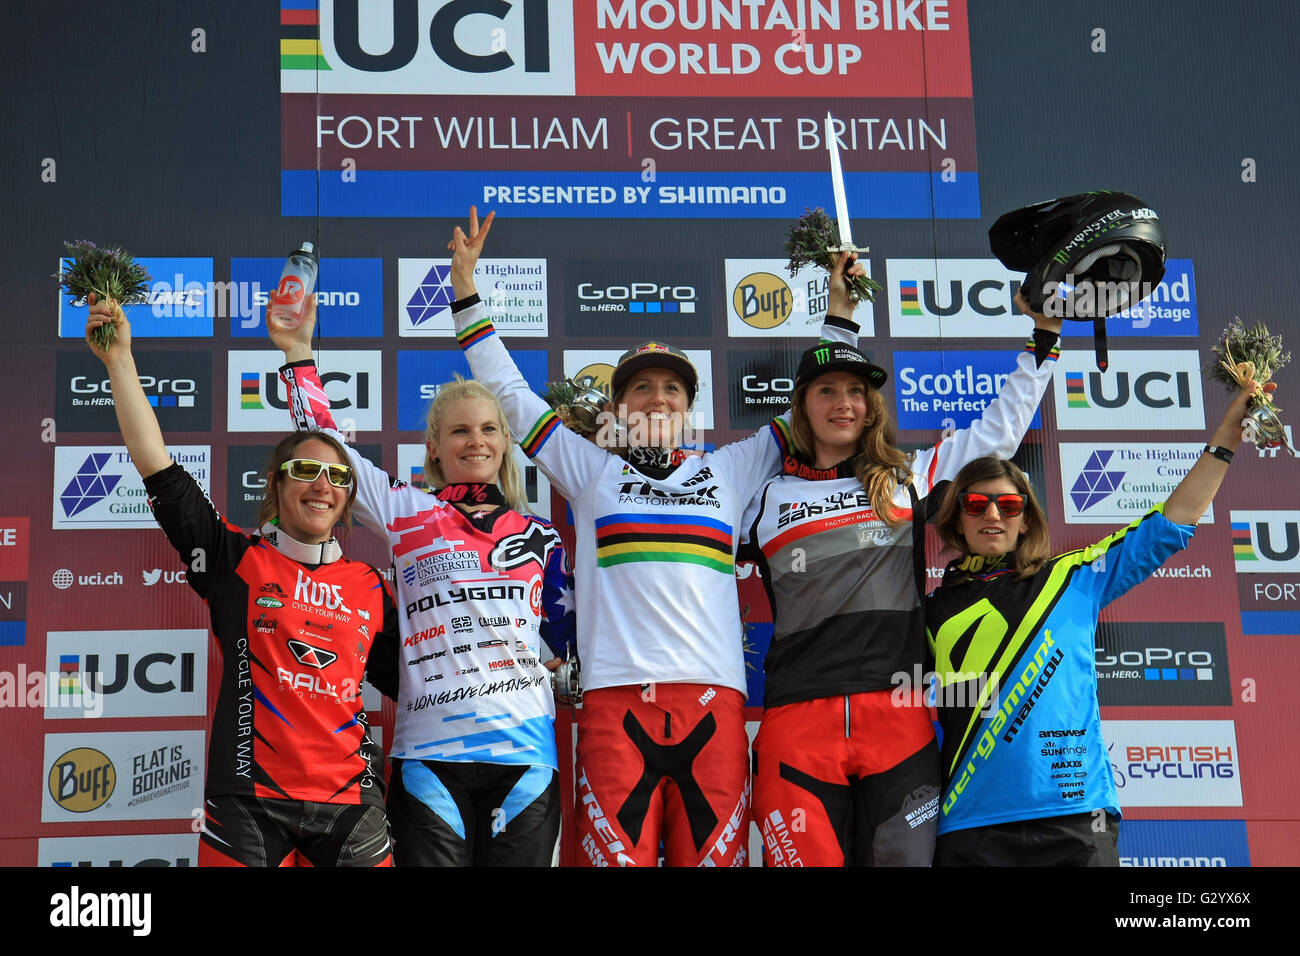 Womens Podium at the Mountain Bike World Cup, Fort William. June 5th 2016. 5th Morgane Charre FRA, 4th Katy Curd GBR, 3rd Manon Carpenter GBR, 2nd Tracey Hannah AUS, Winner Rachel Atherton GBR. Stock Photo